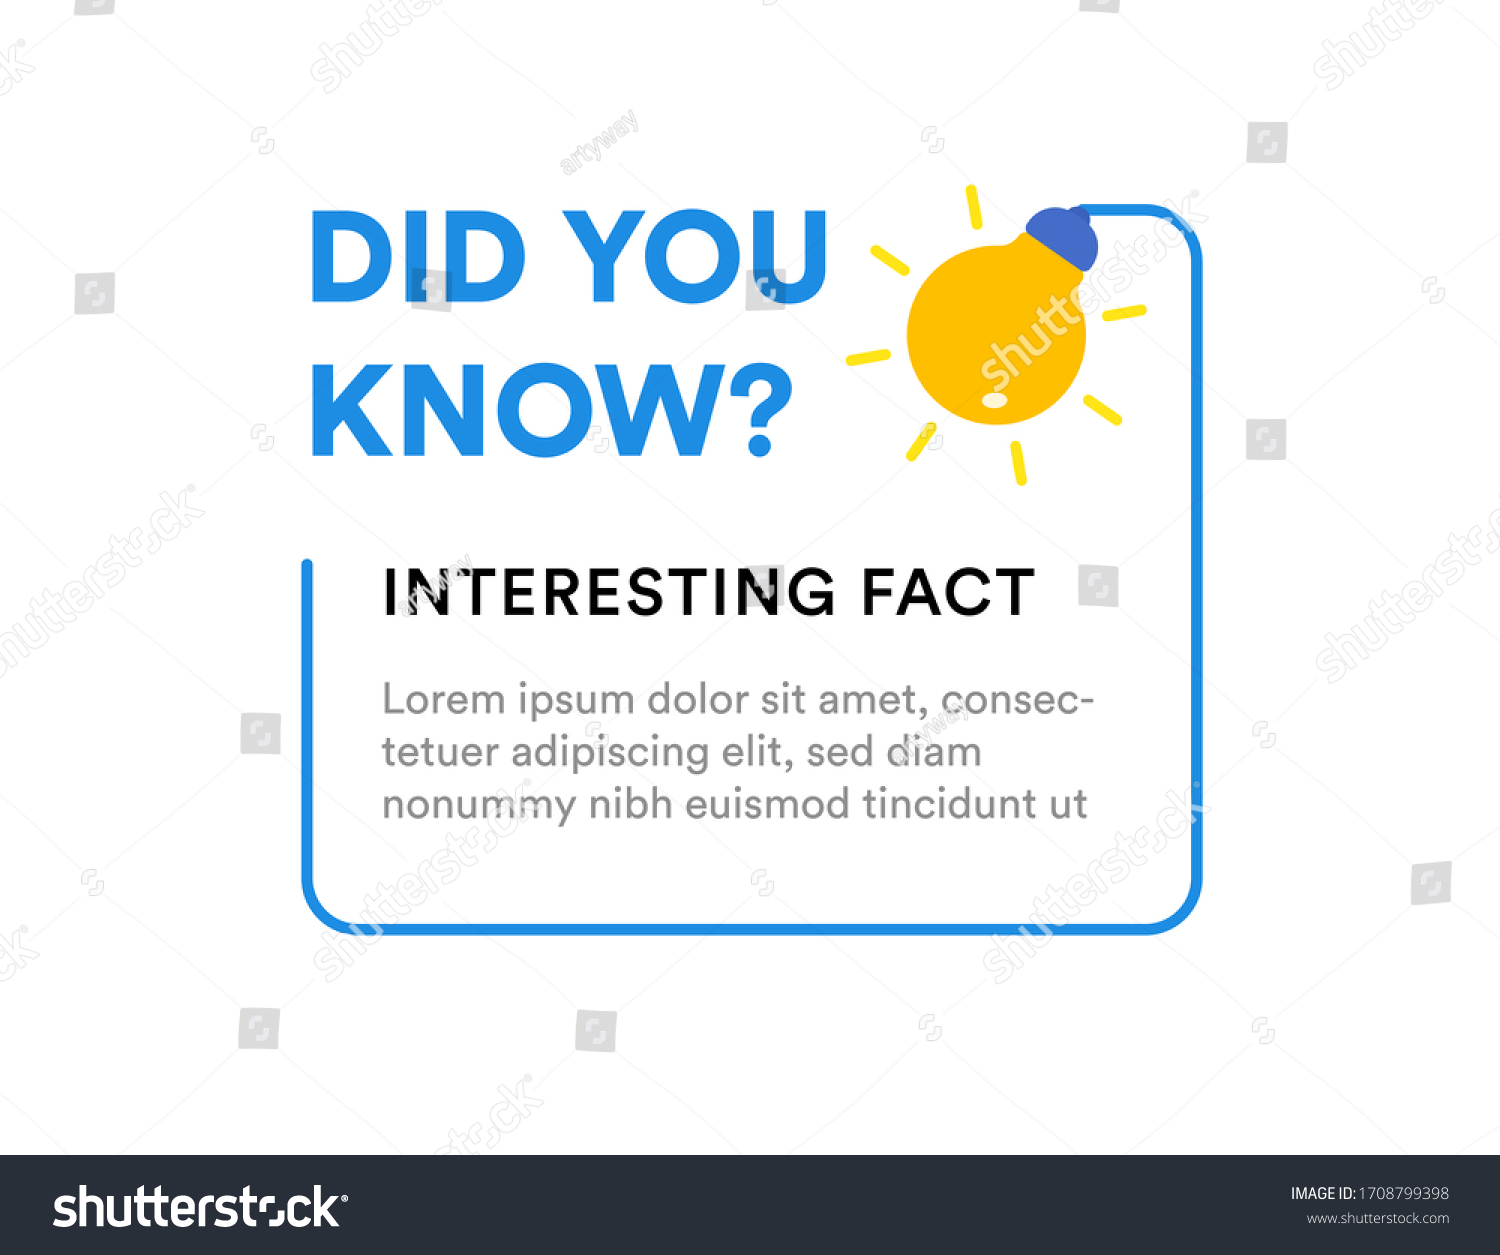 Did you know? Web banner with frame and bulb, idea box, quote for interesting fact. Web interface infographic, flat design element. Vector illustration. #1708799398